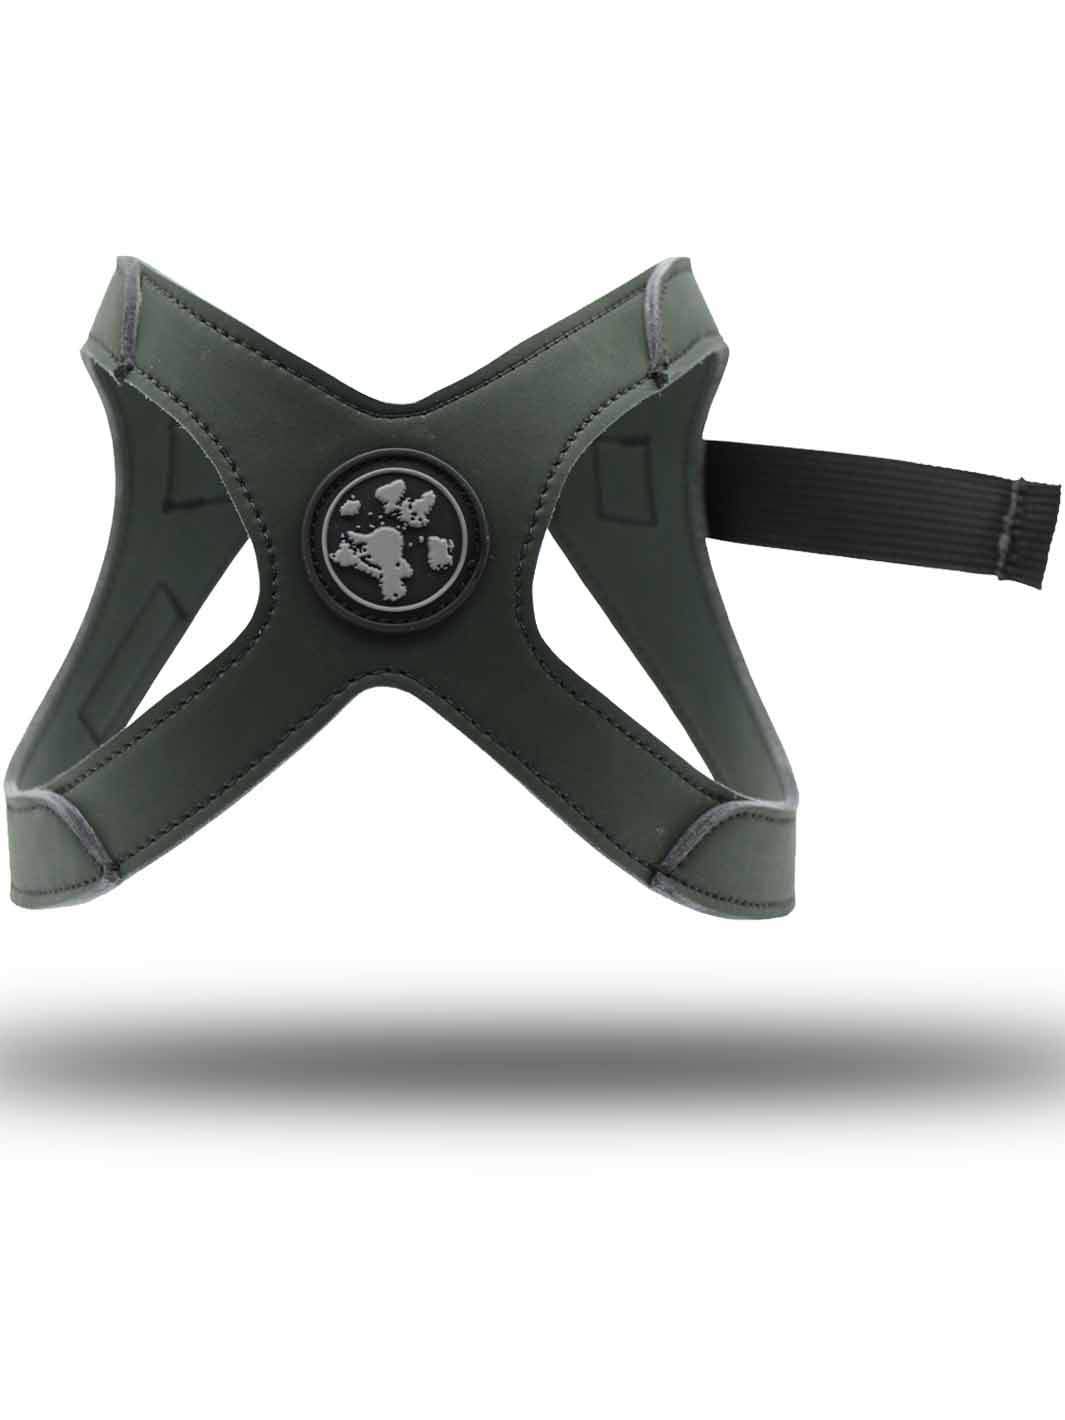 MAGNUS Canis vegan leather dog harness as seen from the front in color dark moss green.